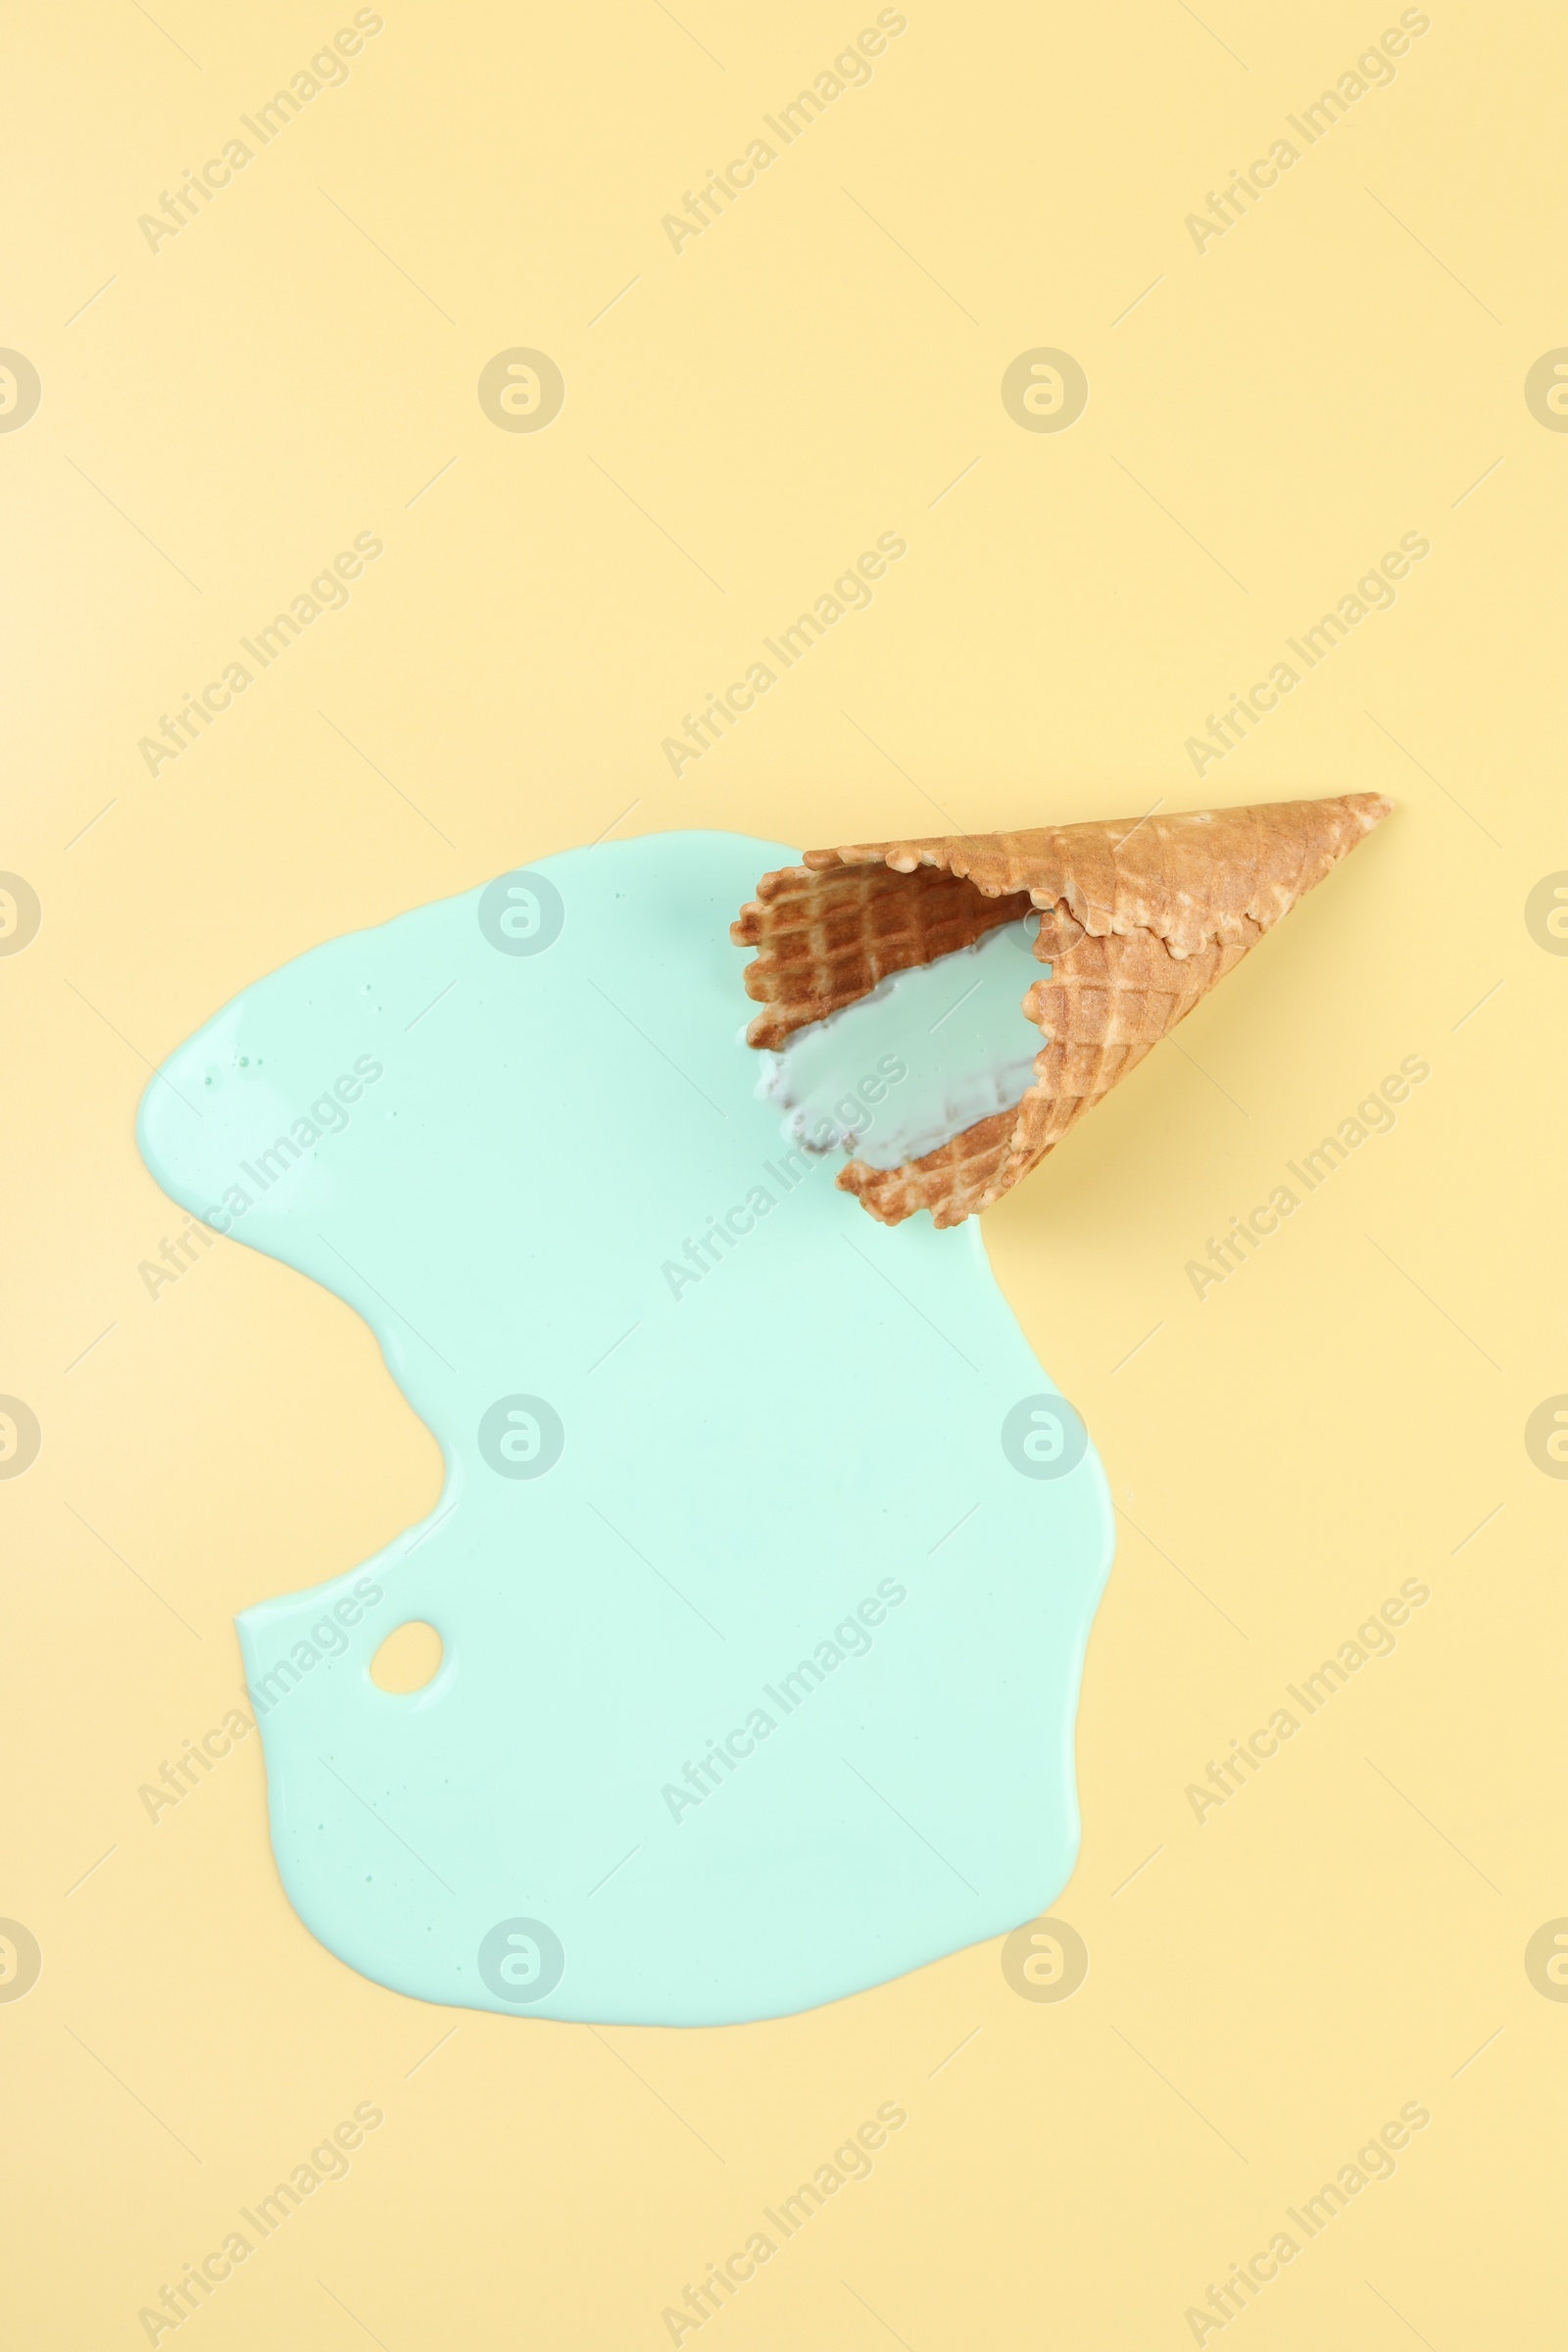 Photo of Melted ice cream and wafer cone on beige background, top view